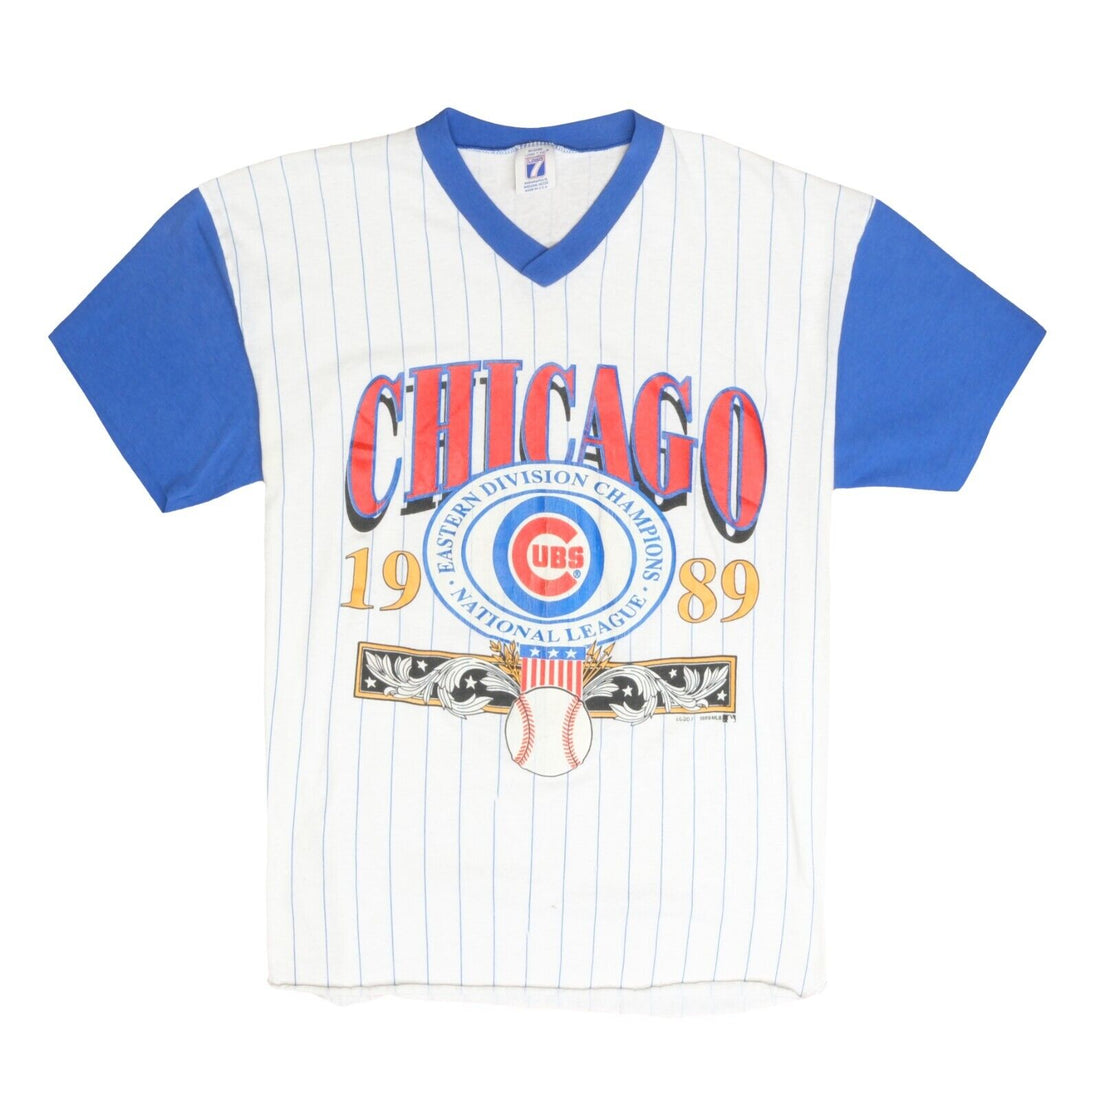 Chicago Cubs Vintage Clothing, Cubs Throwback Hats, Cubs Vintage Gear,  Jerseys, Shirts